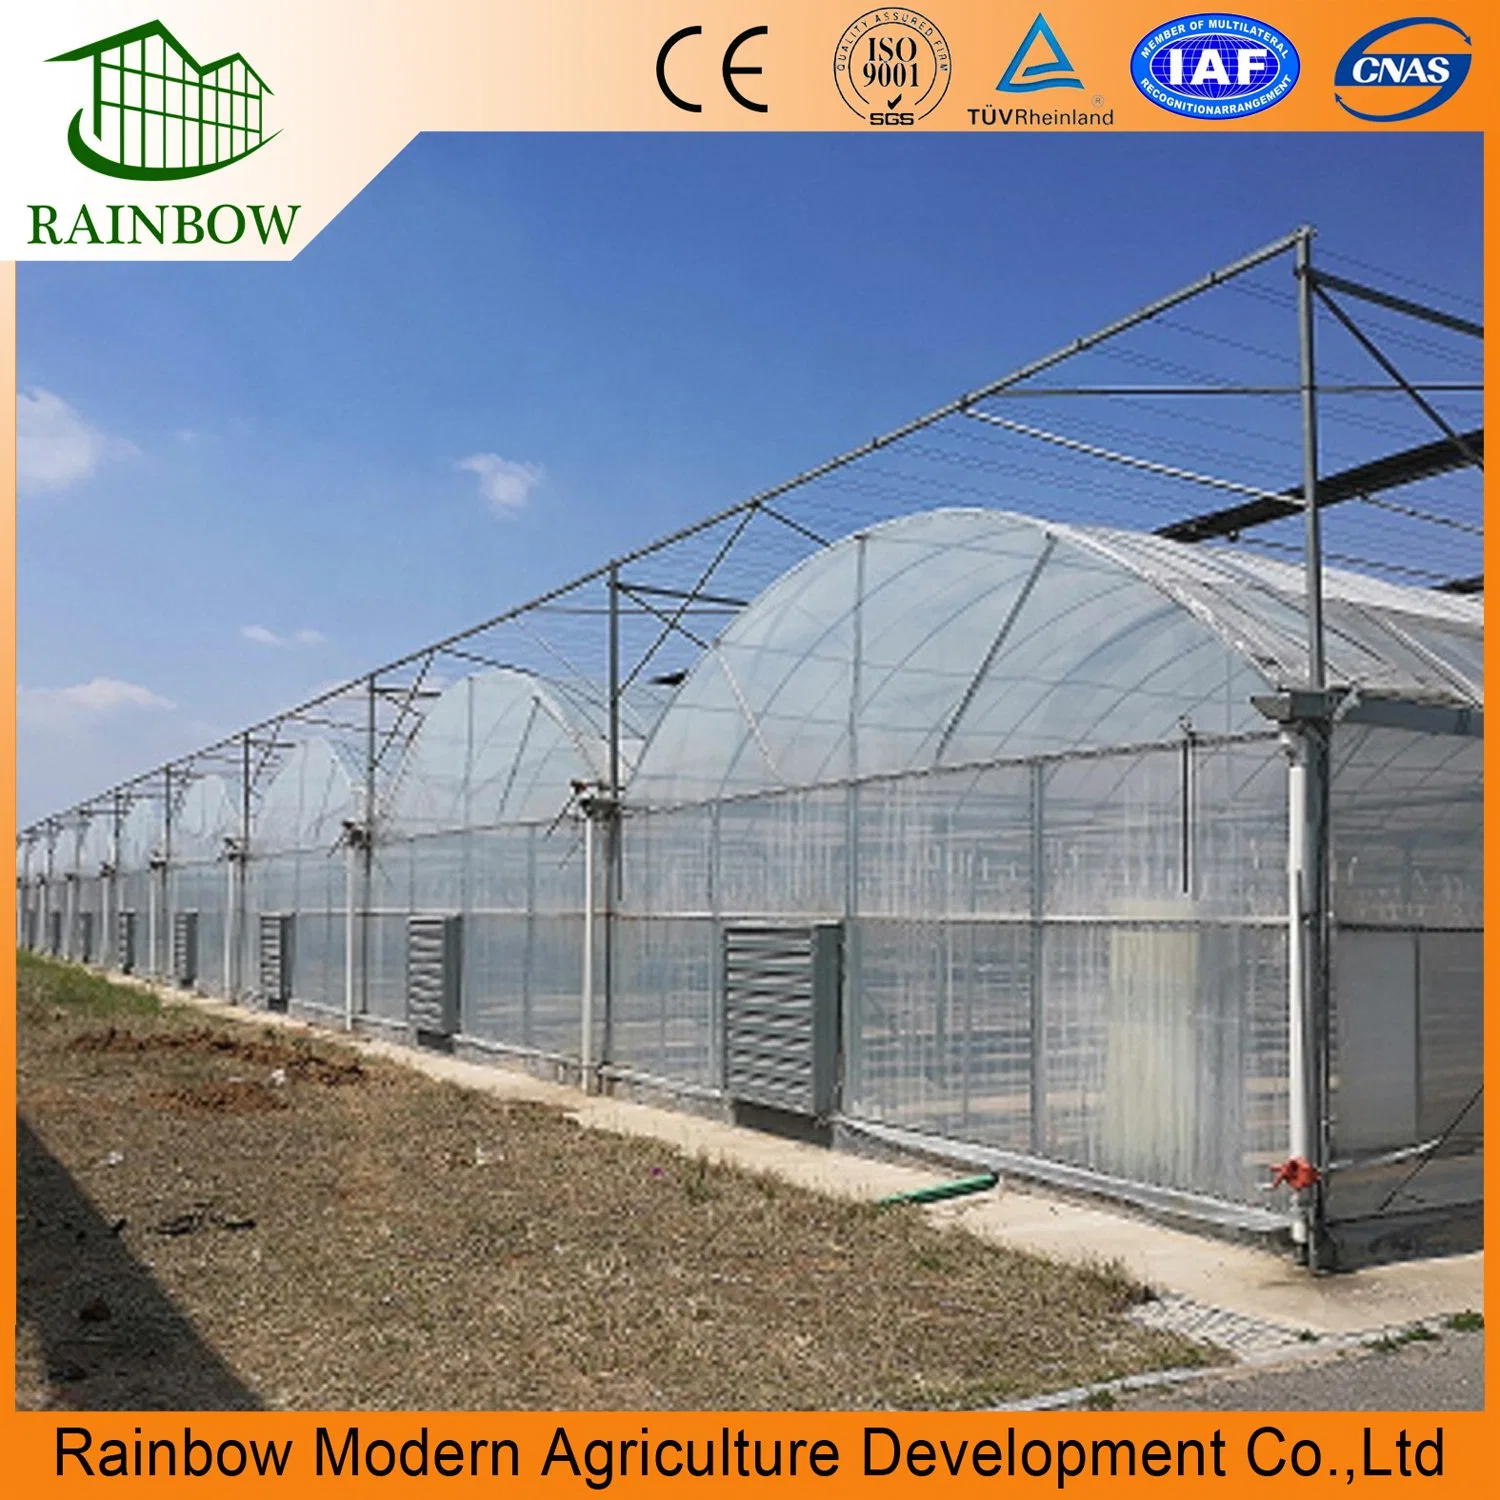 Commercial Greenhouse Poly Film Multi-Span Film Greenhouse for Planting Tomato Cucumber Lettuce